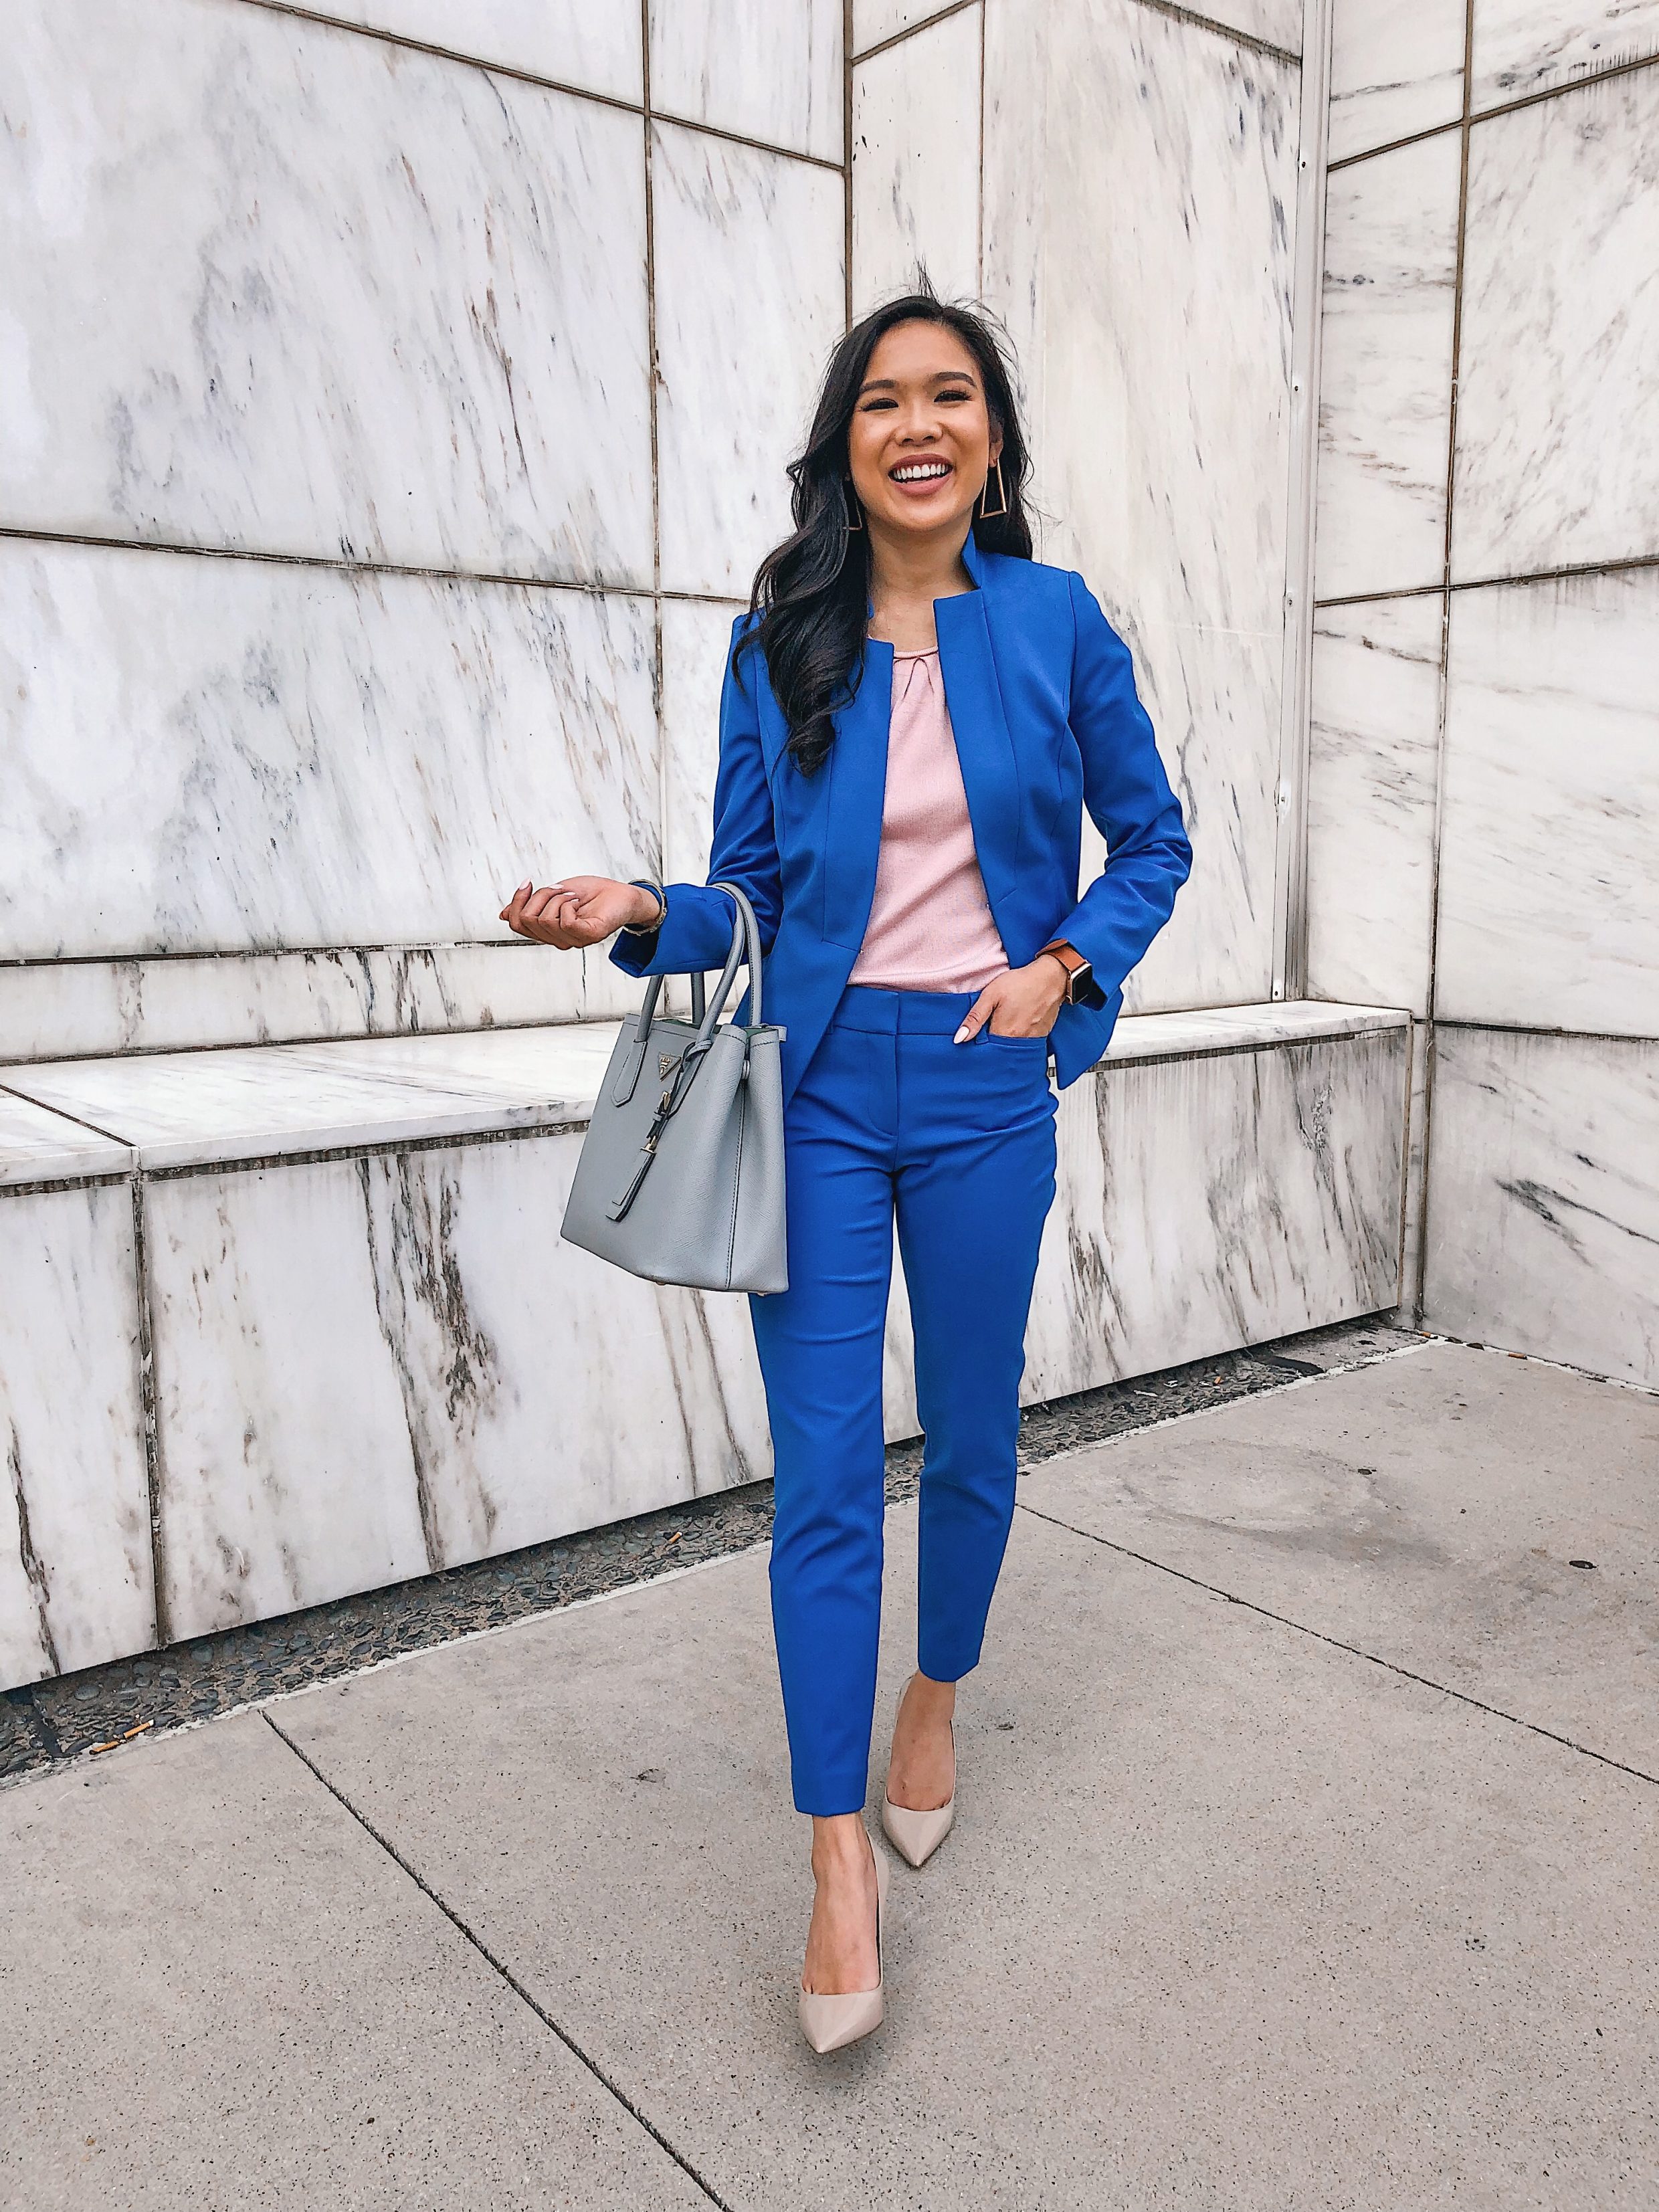 Blogger Hoang-Kim wears a blue pant suit from White House Black Market